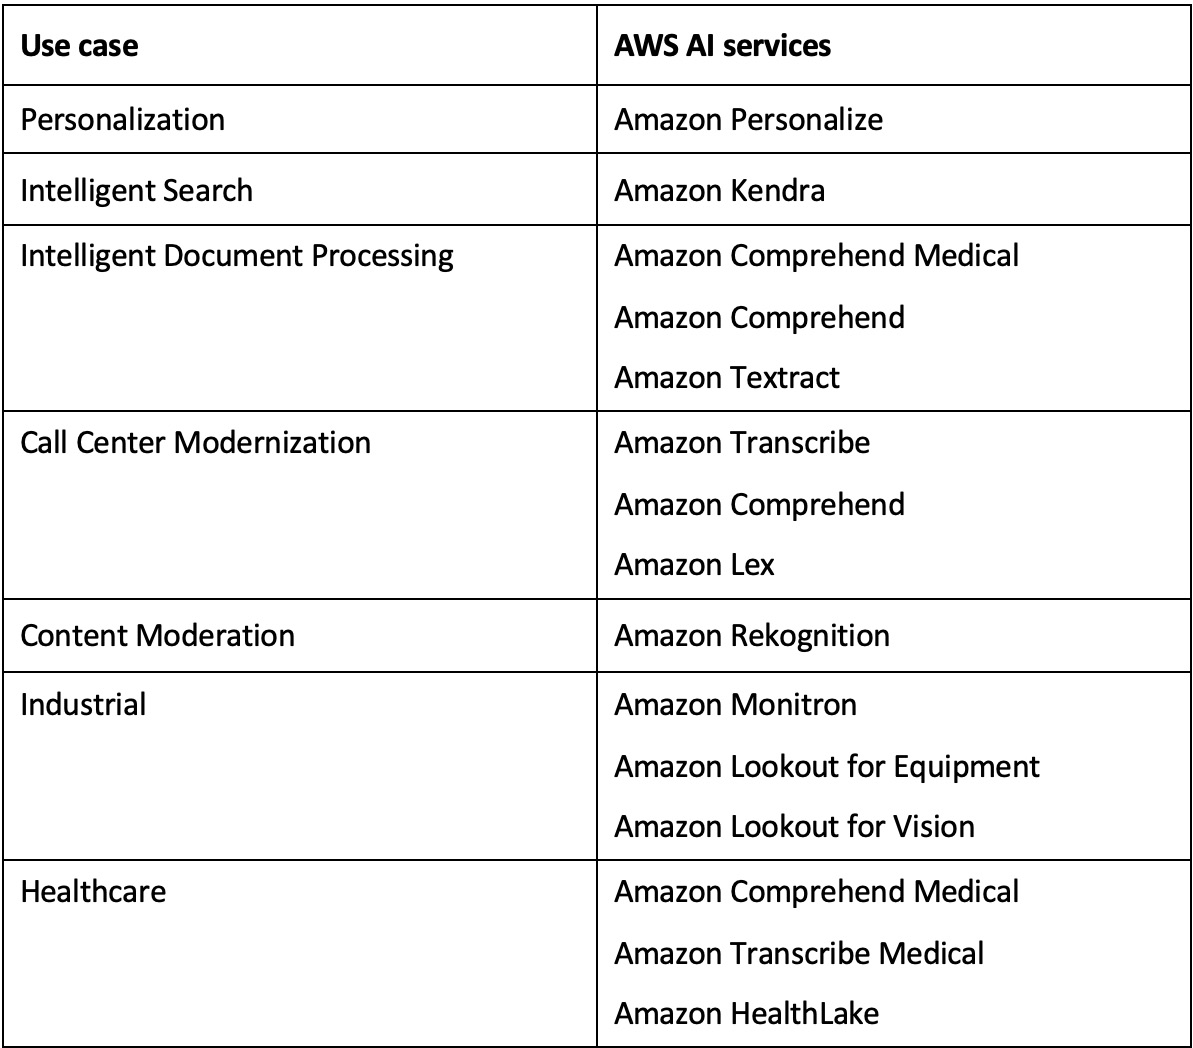 Figure 1.4 – AI services at the top of the AWS stack 
